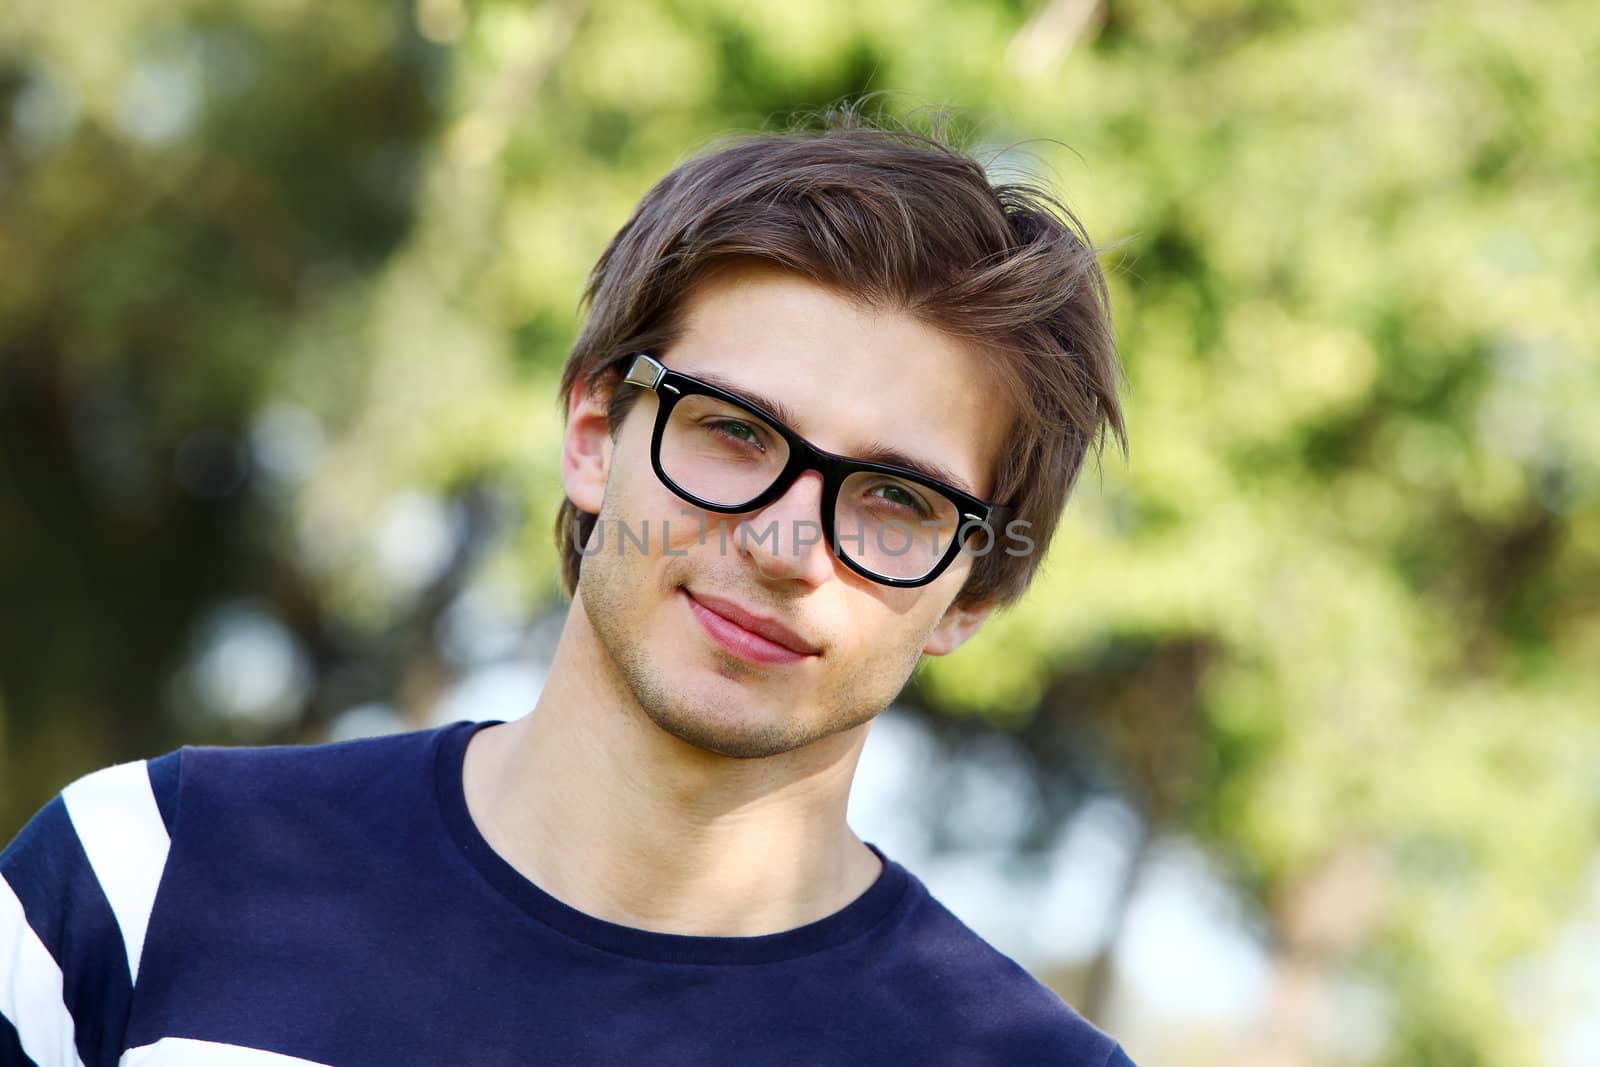 Portrait of young cute man with glasses in park by rufatjumali